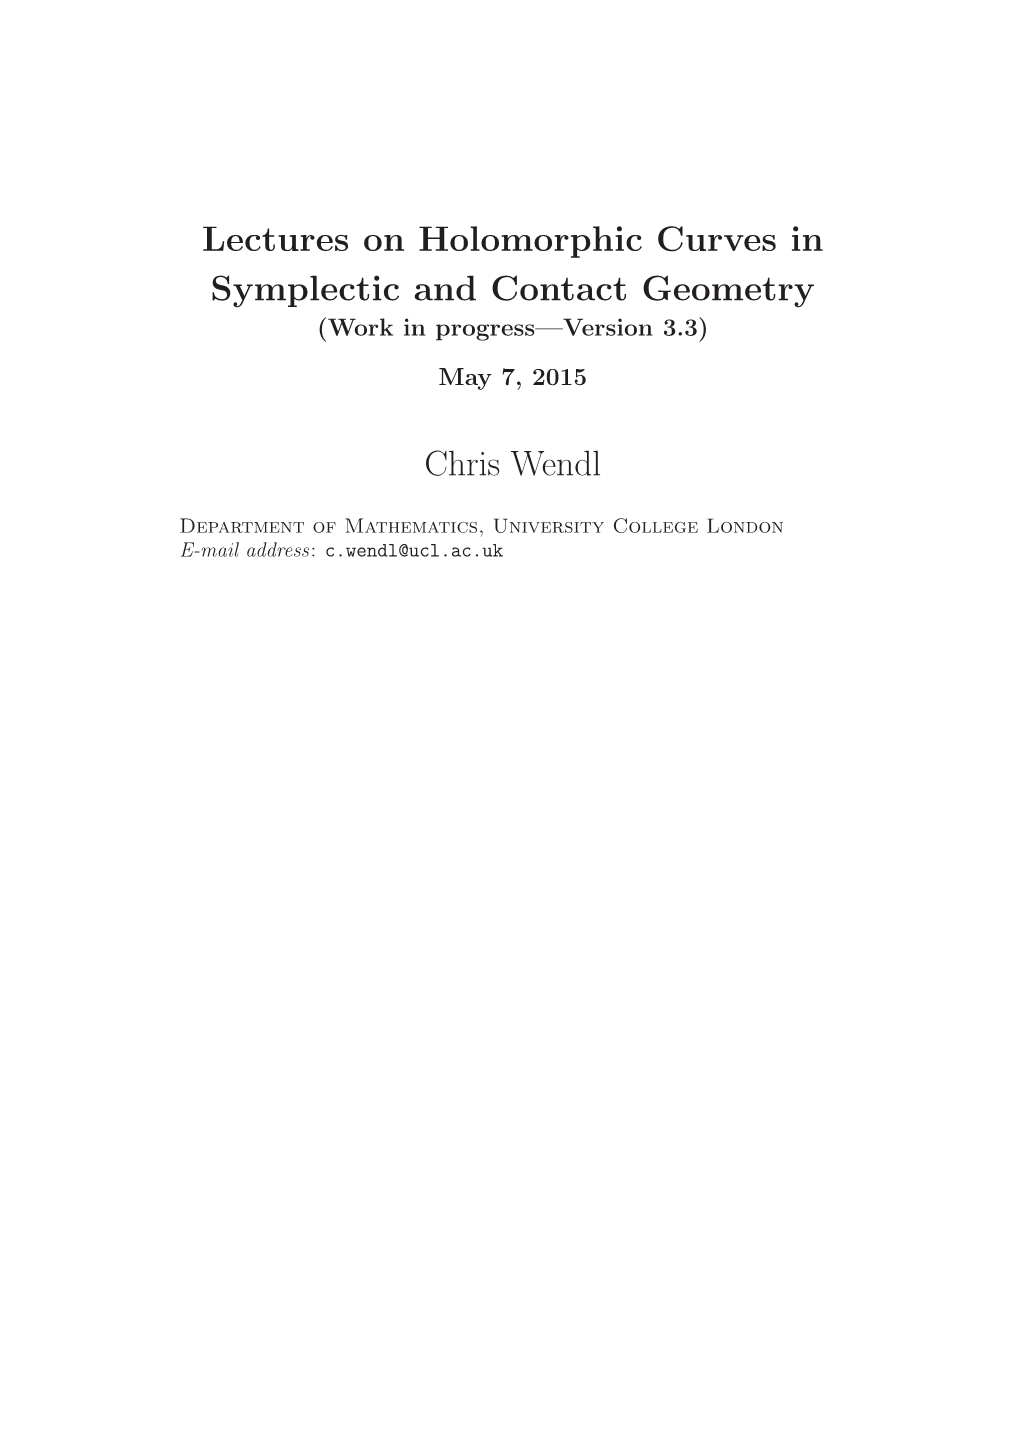 Lectures on Holomorphic Curves in Symplectic and Contact Geometry (Work in Progress—Version 3.3)